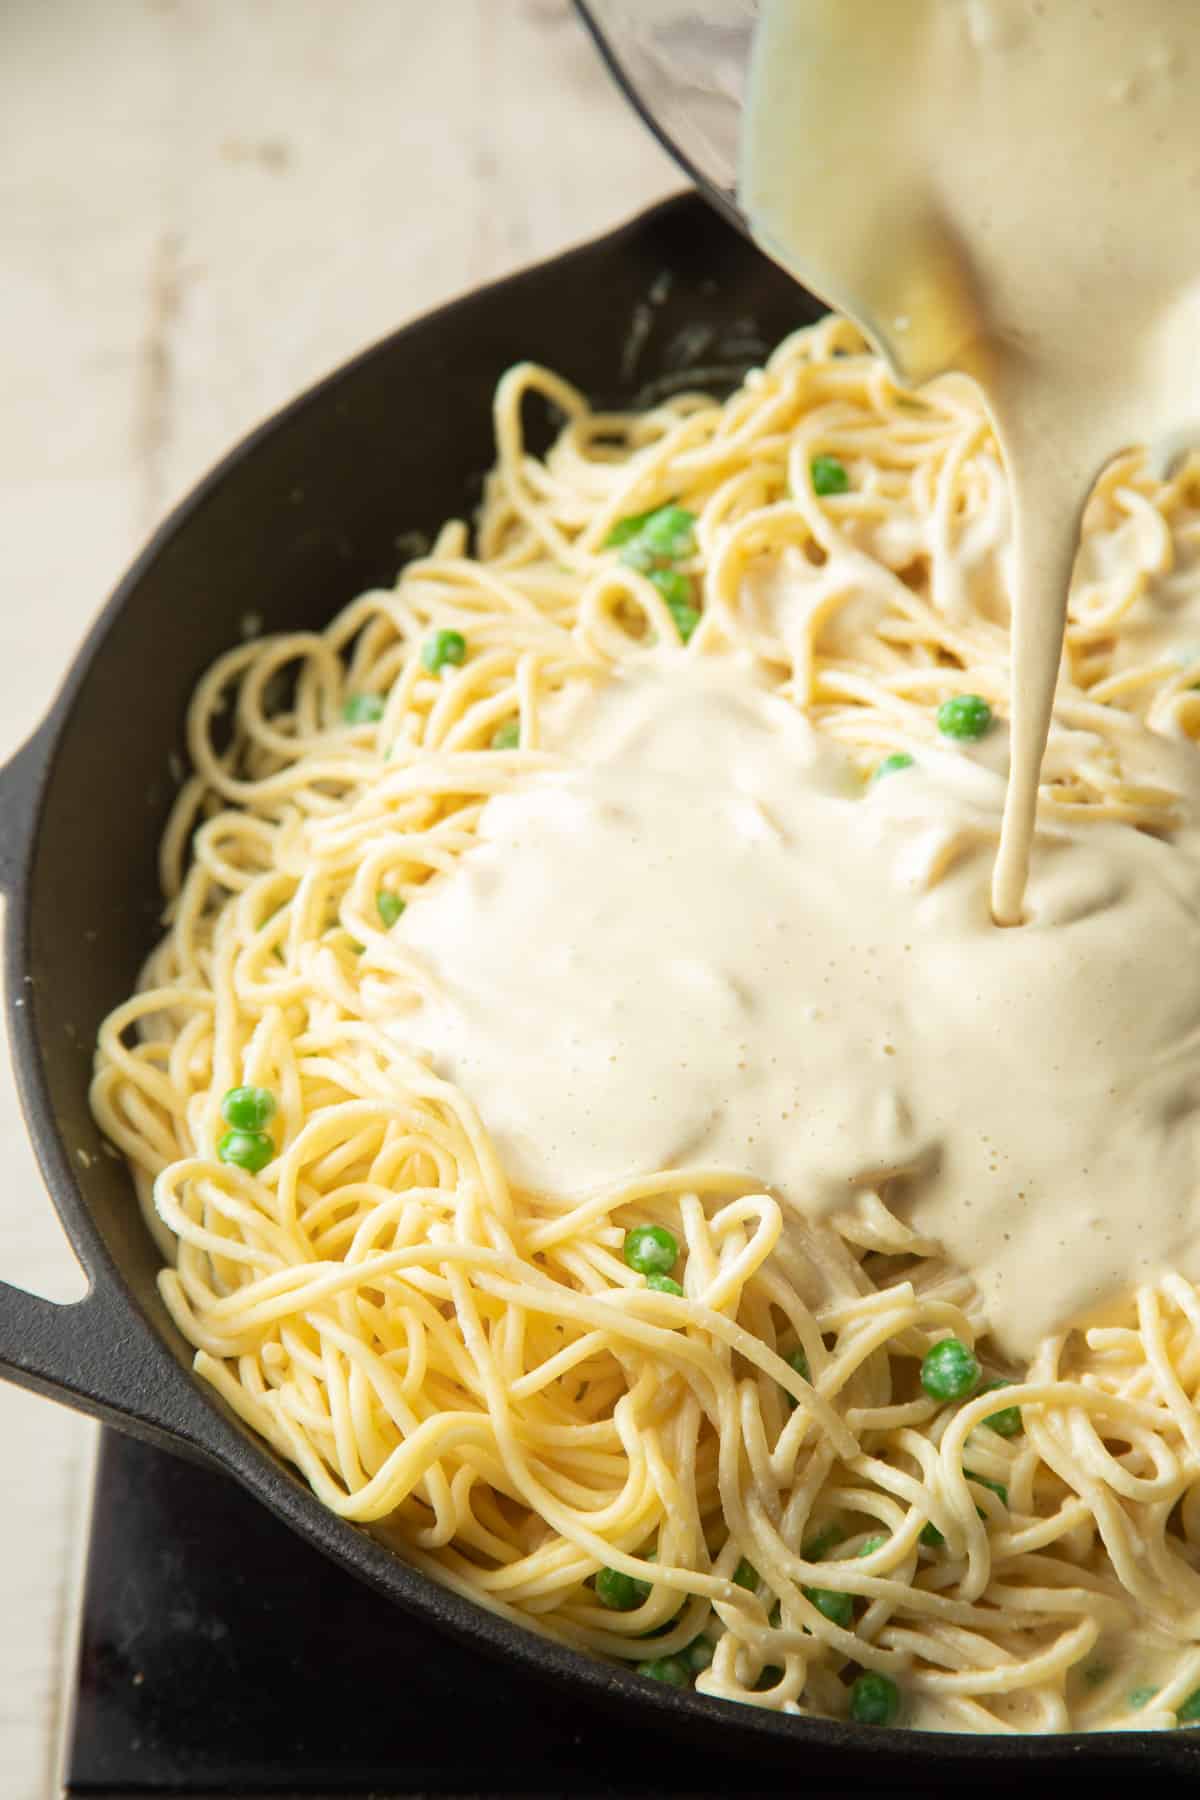 Vegan carbonara sauce being poured over a skillet of spaghetti.